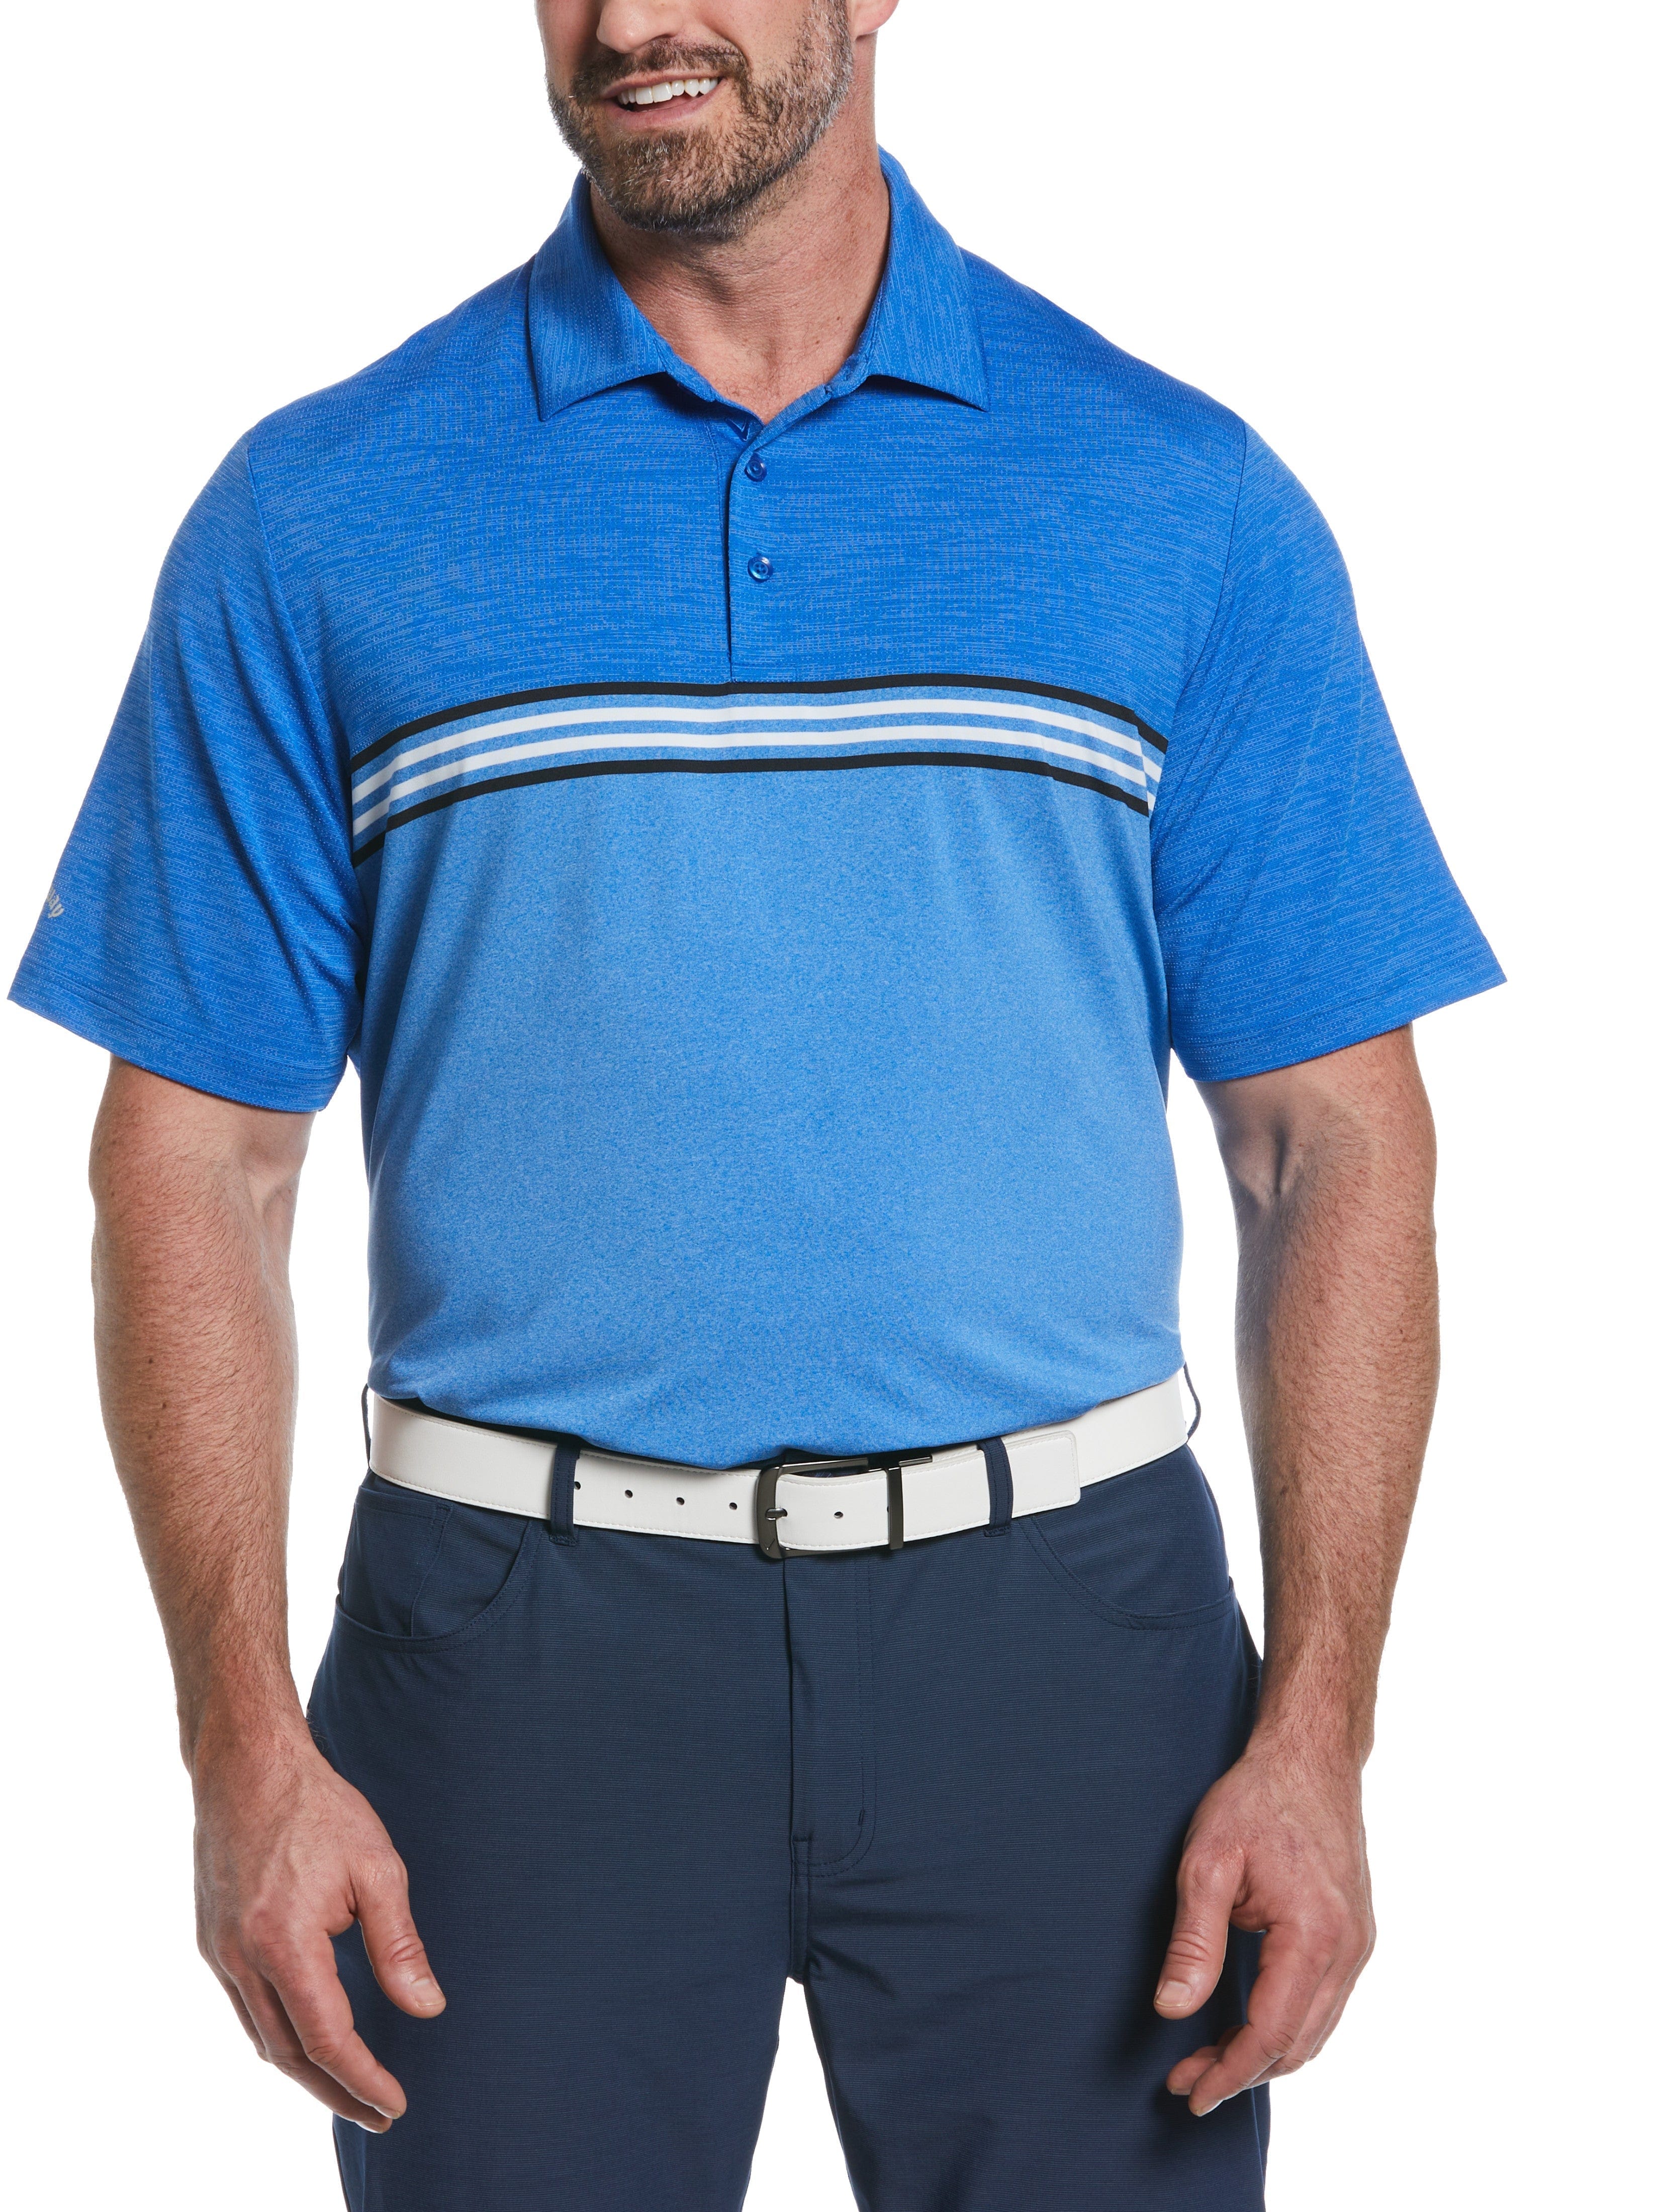 Callaway Apparel Mens Big & Tall Yarn Dyed Ventilated Jaspe Engineered Stripe Golf Polo Shirt, Size 4X, Magnetic Heather Blue, Polyester/Recycled Pol